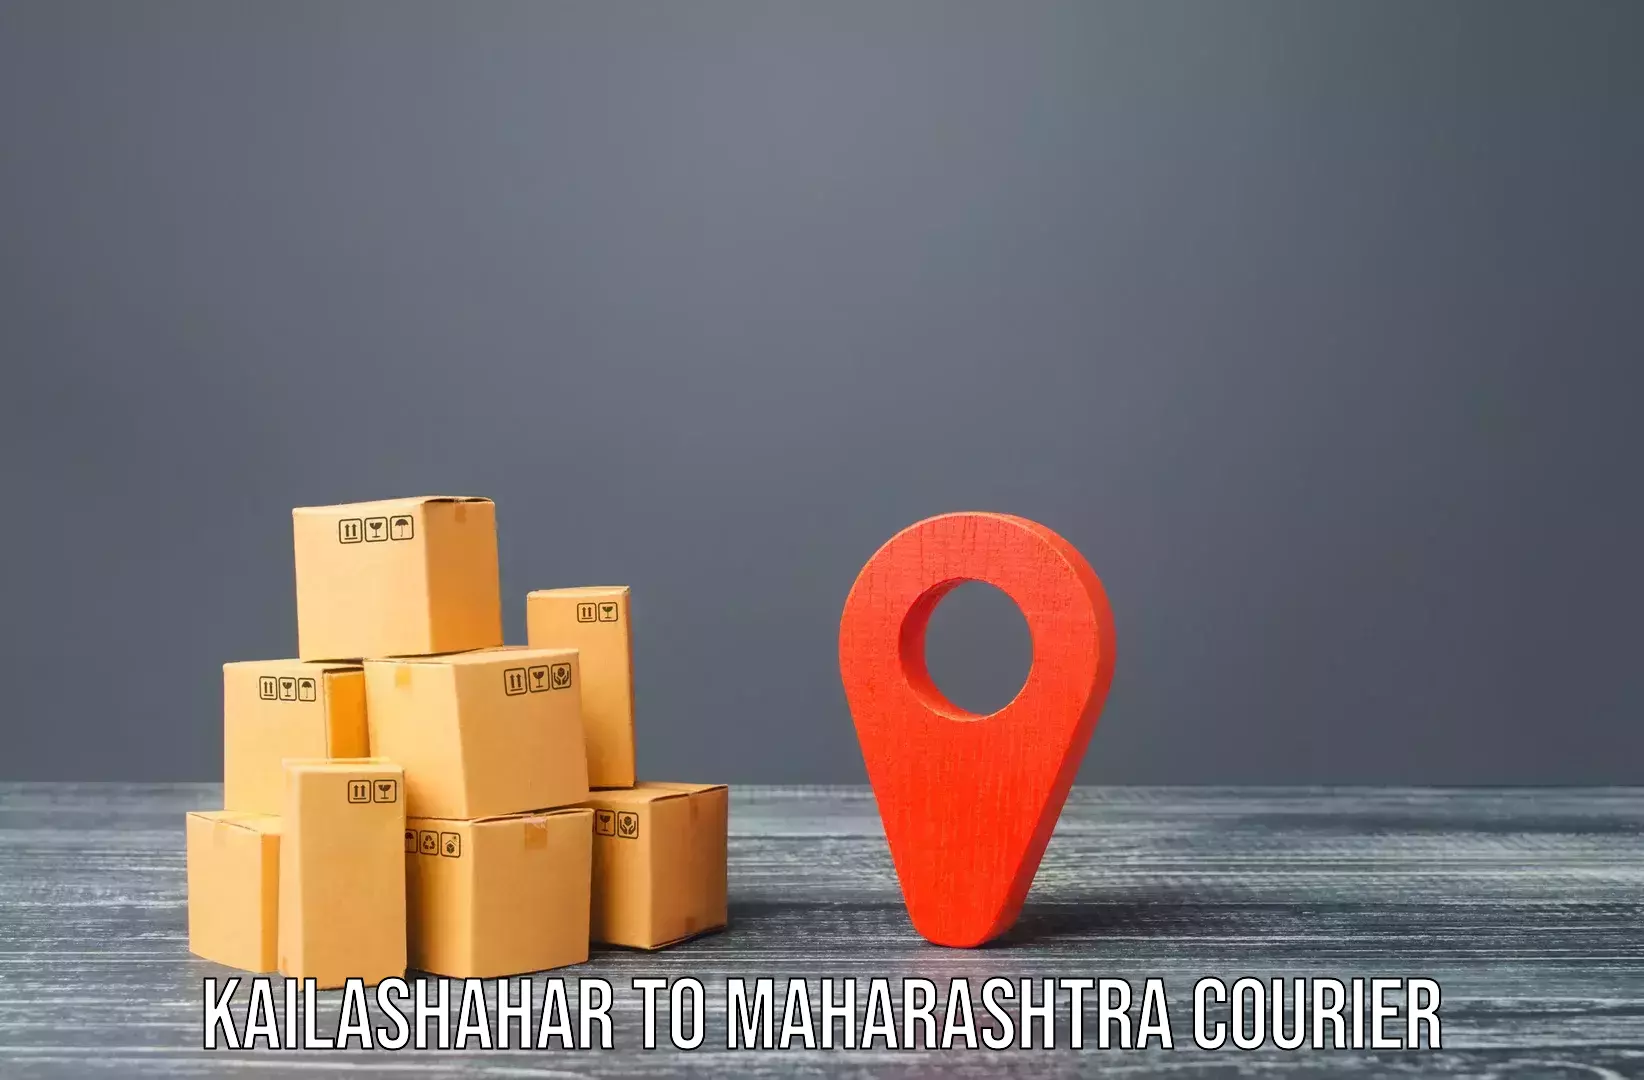 Home moving specialists in Kailashahar to Karjat